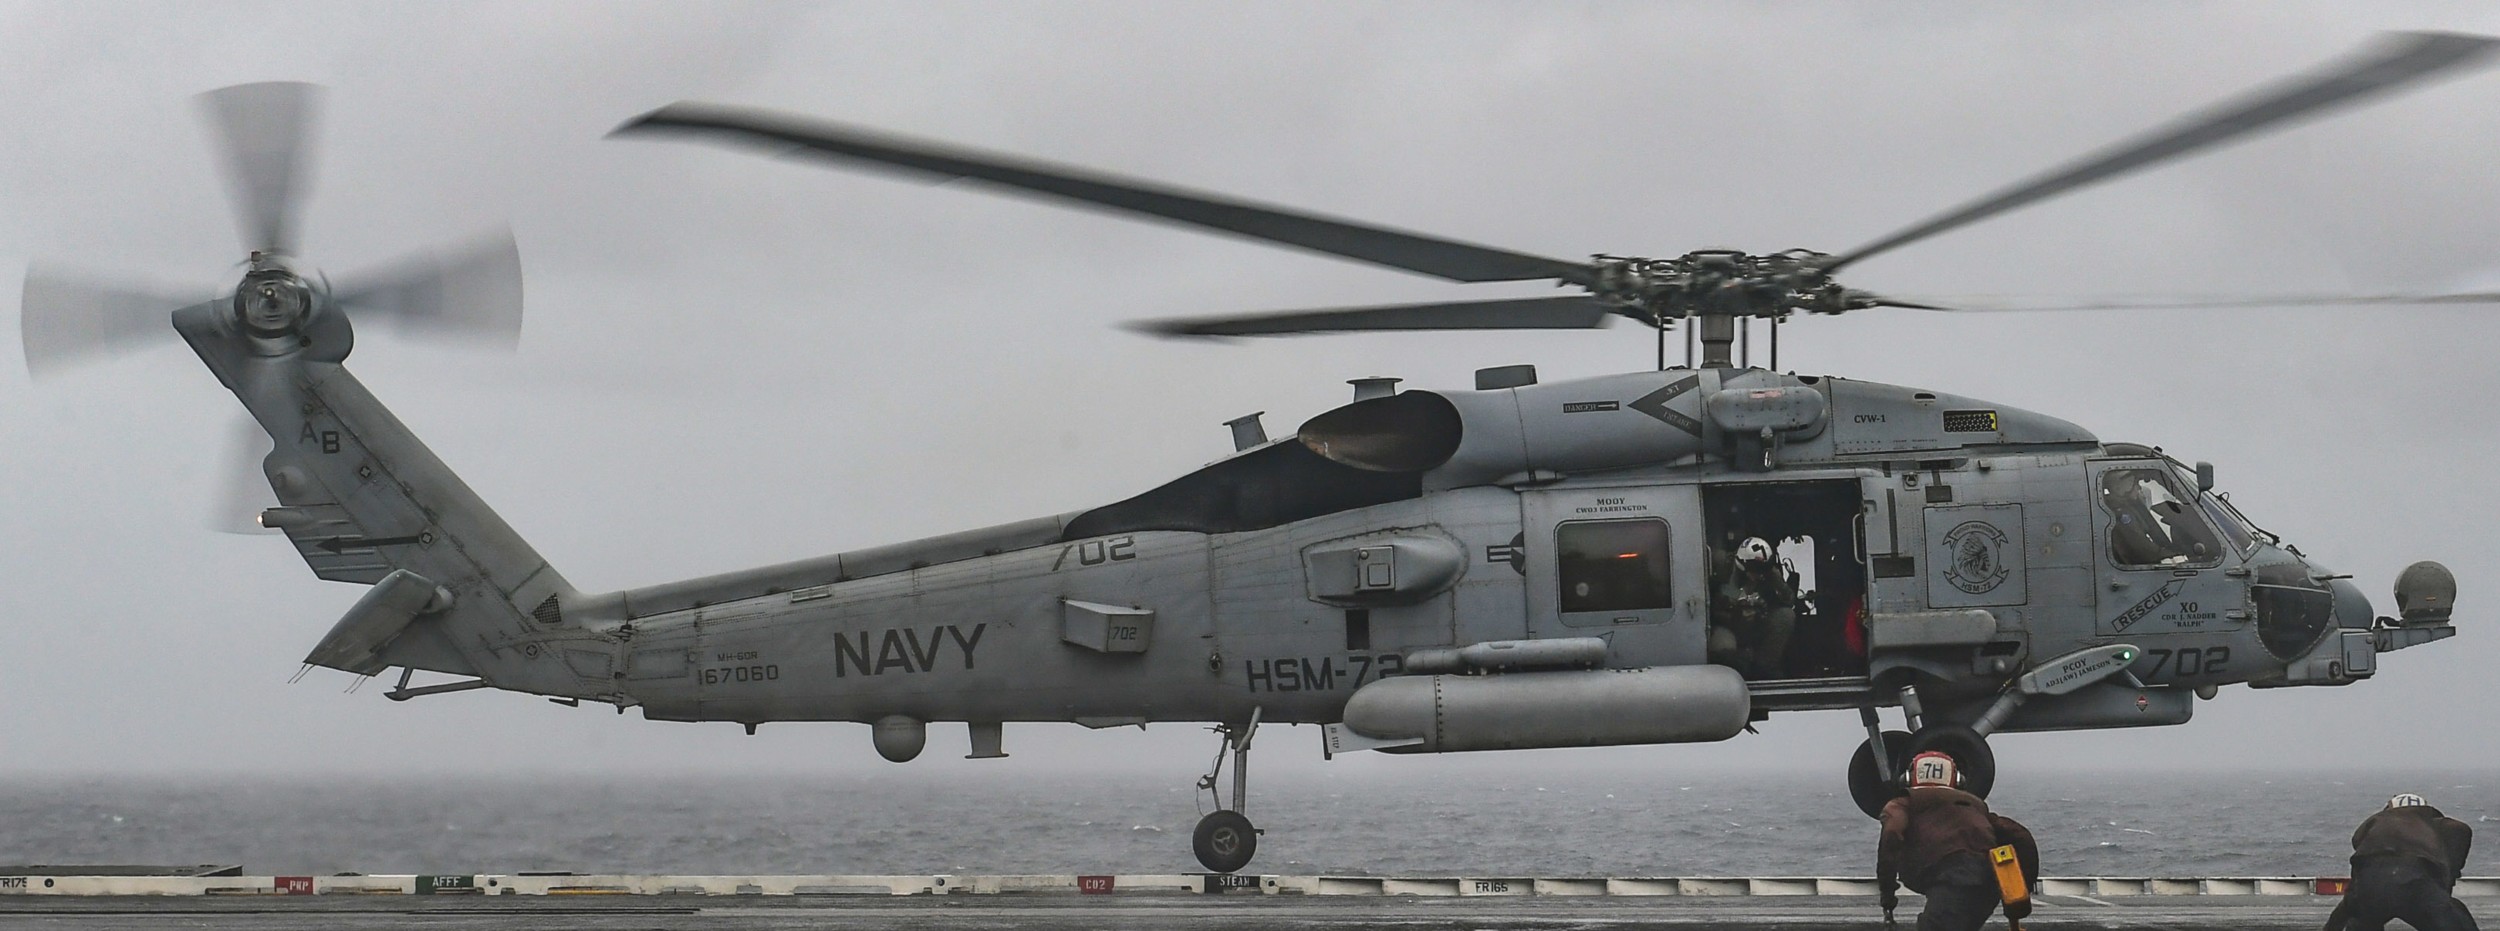 hsm-72 proud warriors helicopter maritime strike squadron mh-60r seahawk carrier air wing cvw-1 cvn-75 uss harry s. truman 2018